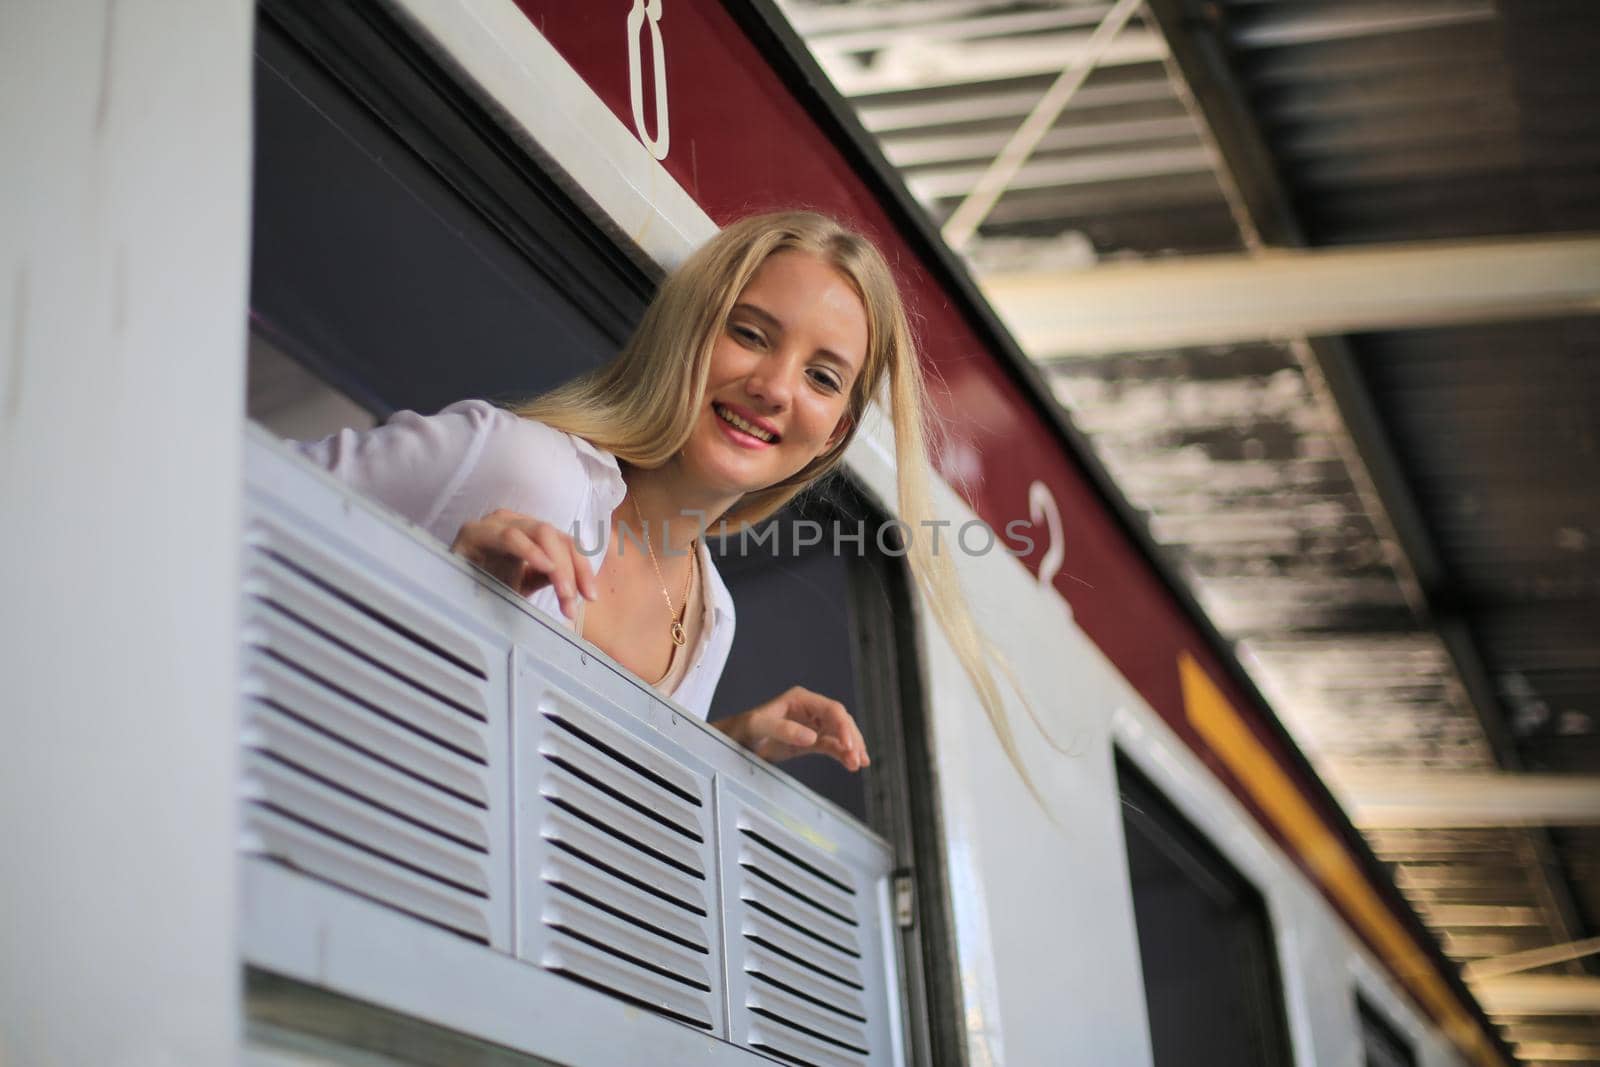 young woman waiting in vintage train, relaxed and carefree at the station platform in Bangkok, Thailand before catching a train. Travel photography. Lifestyle.